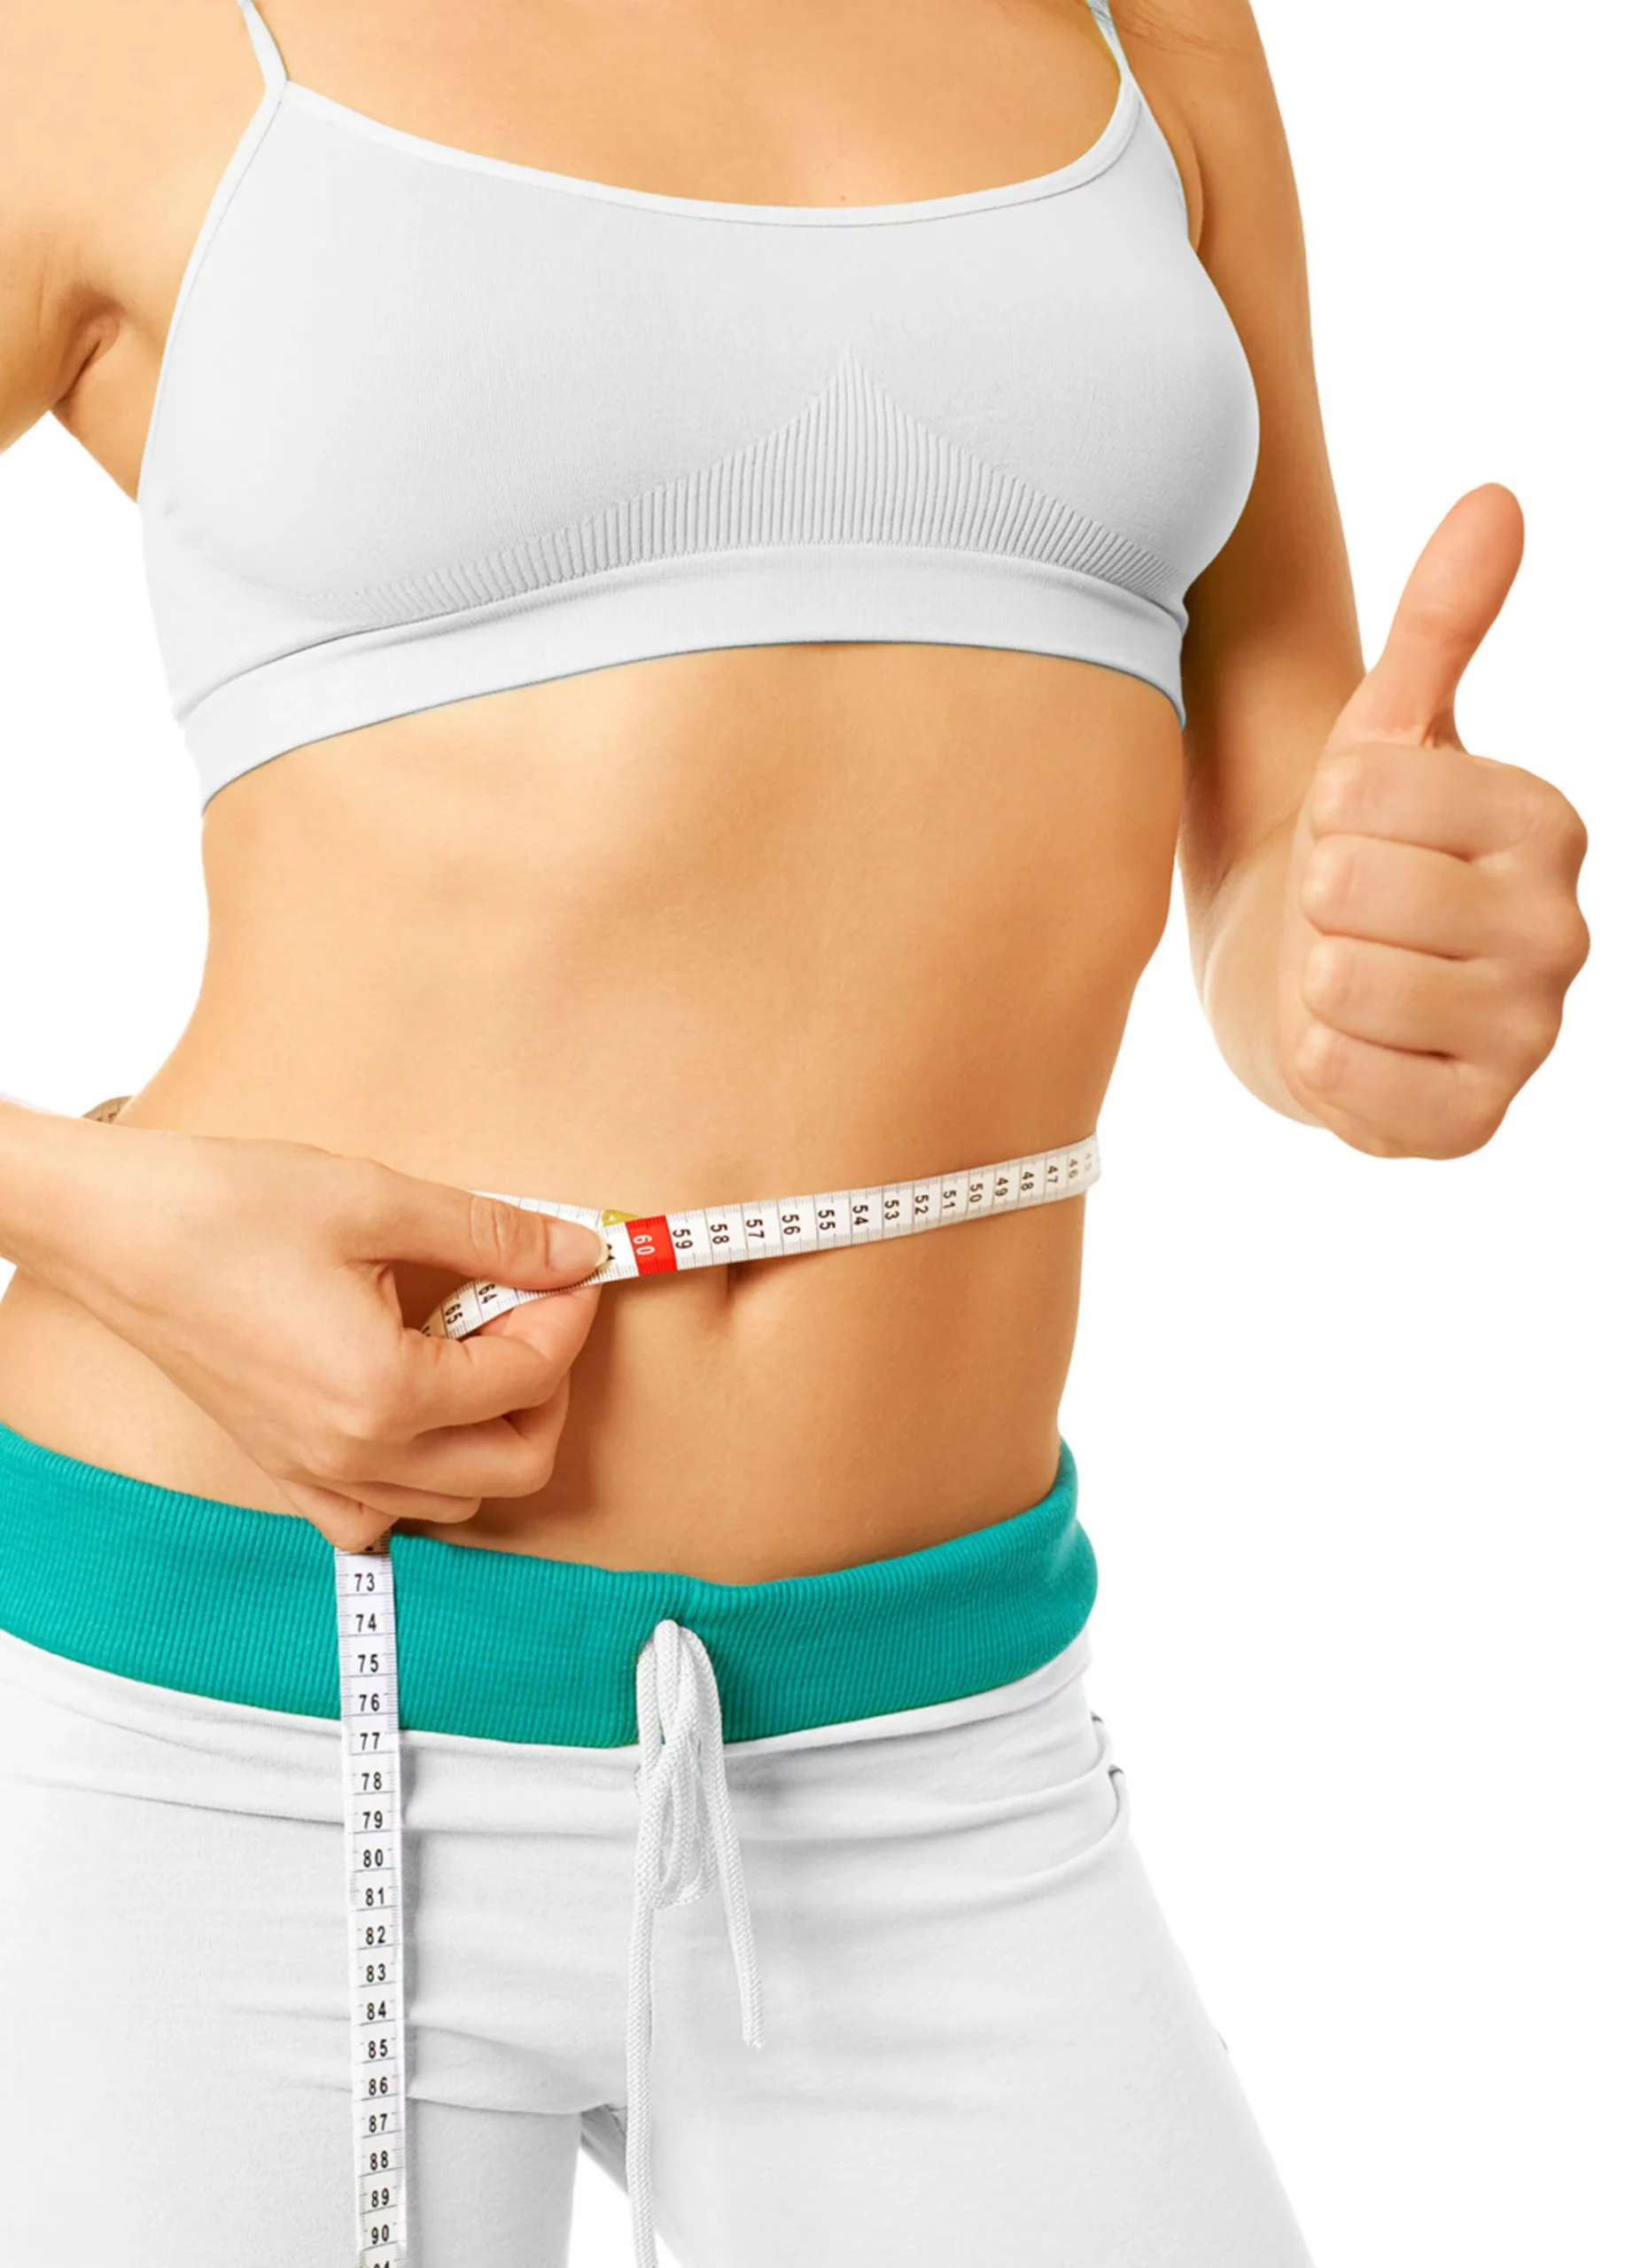 Gastric Sleeve Surgery in Chicago